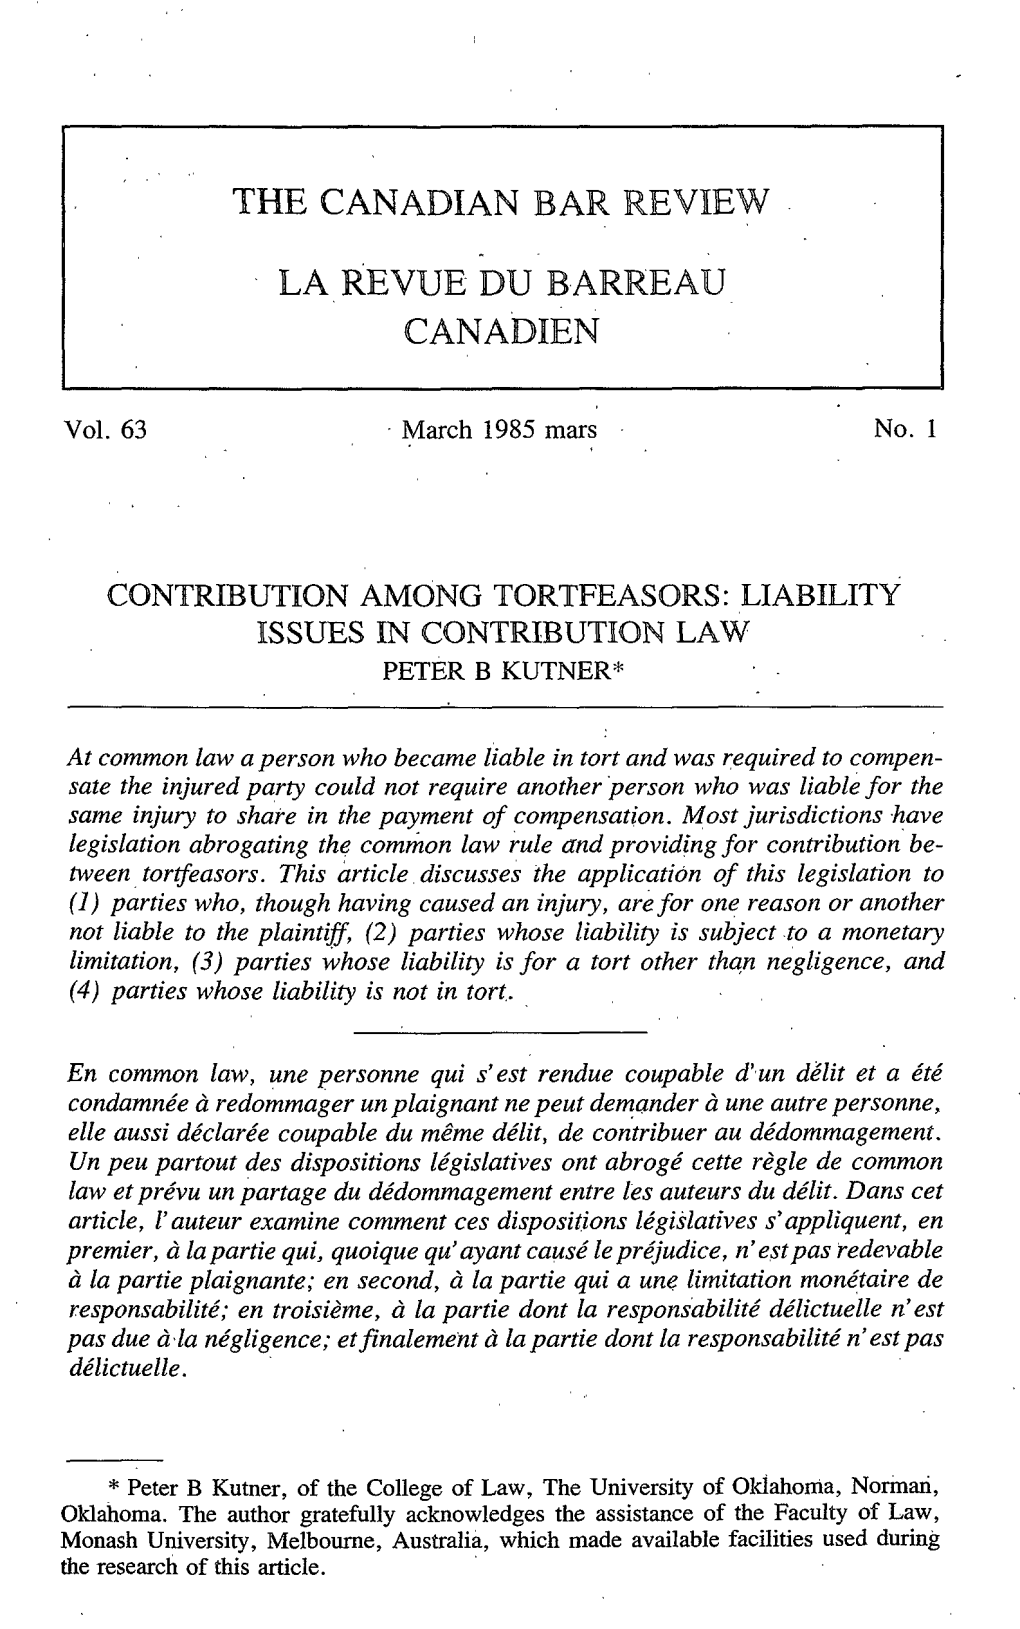 Liability Issues in Contribution Law Peter B Kutner*